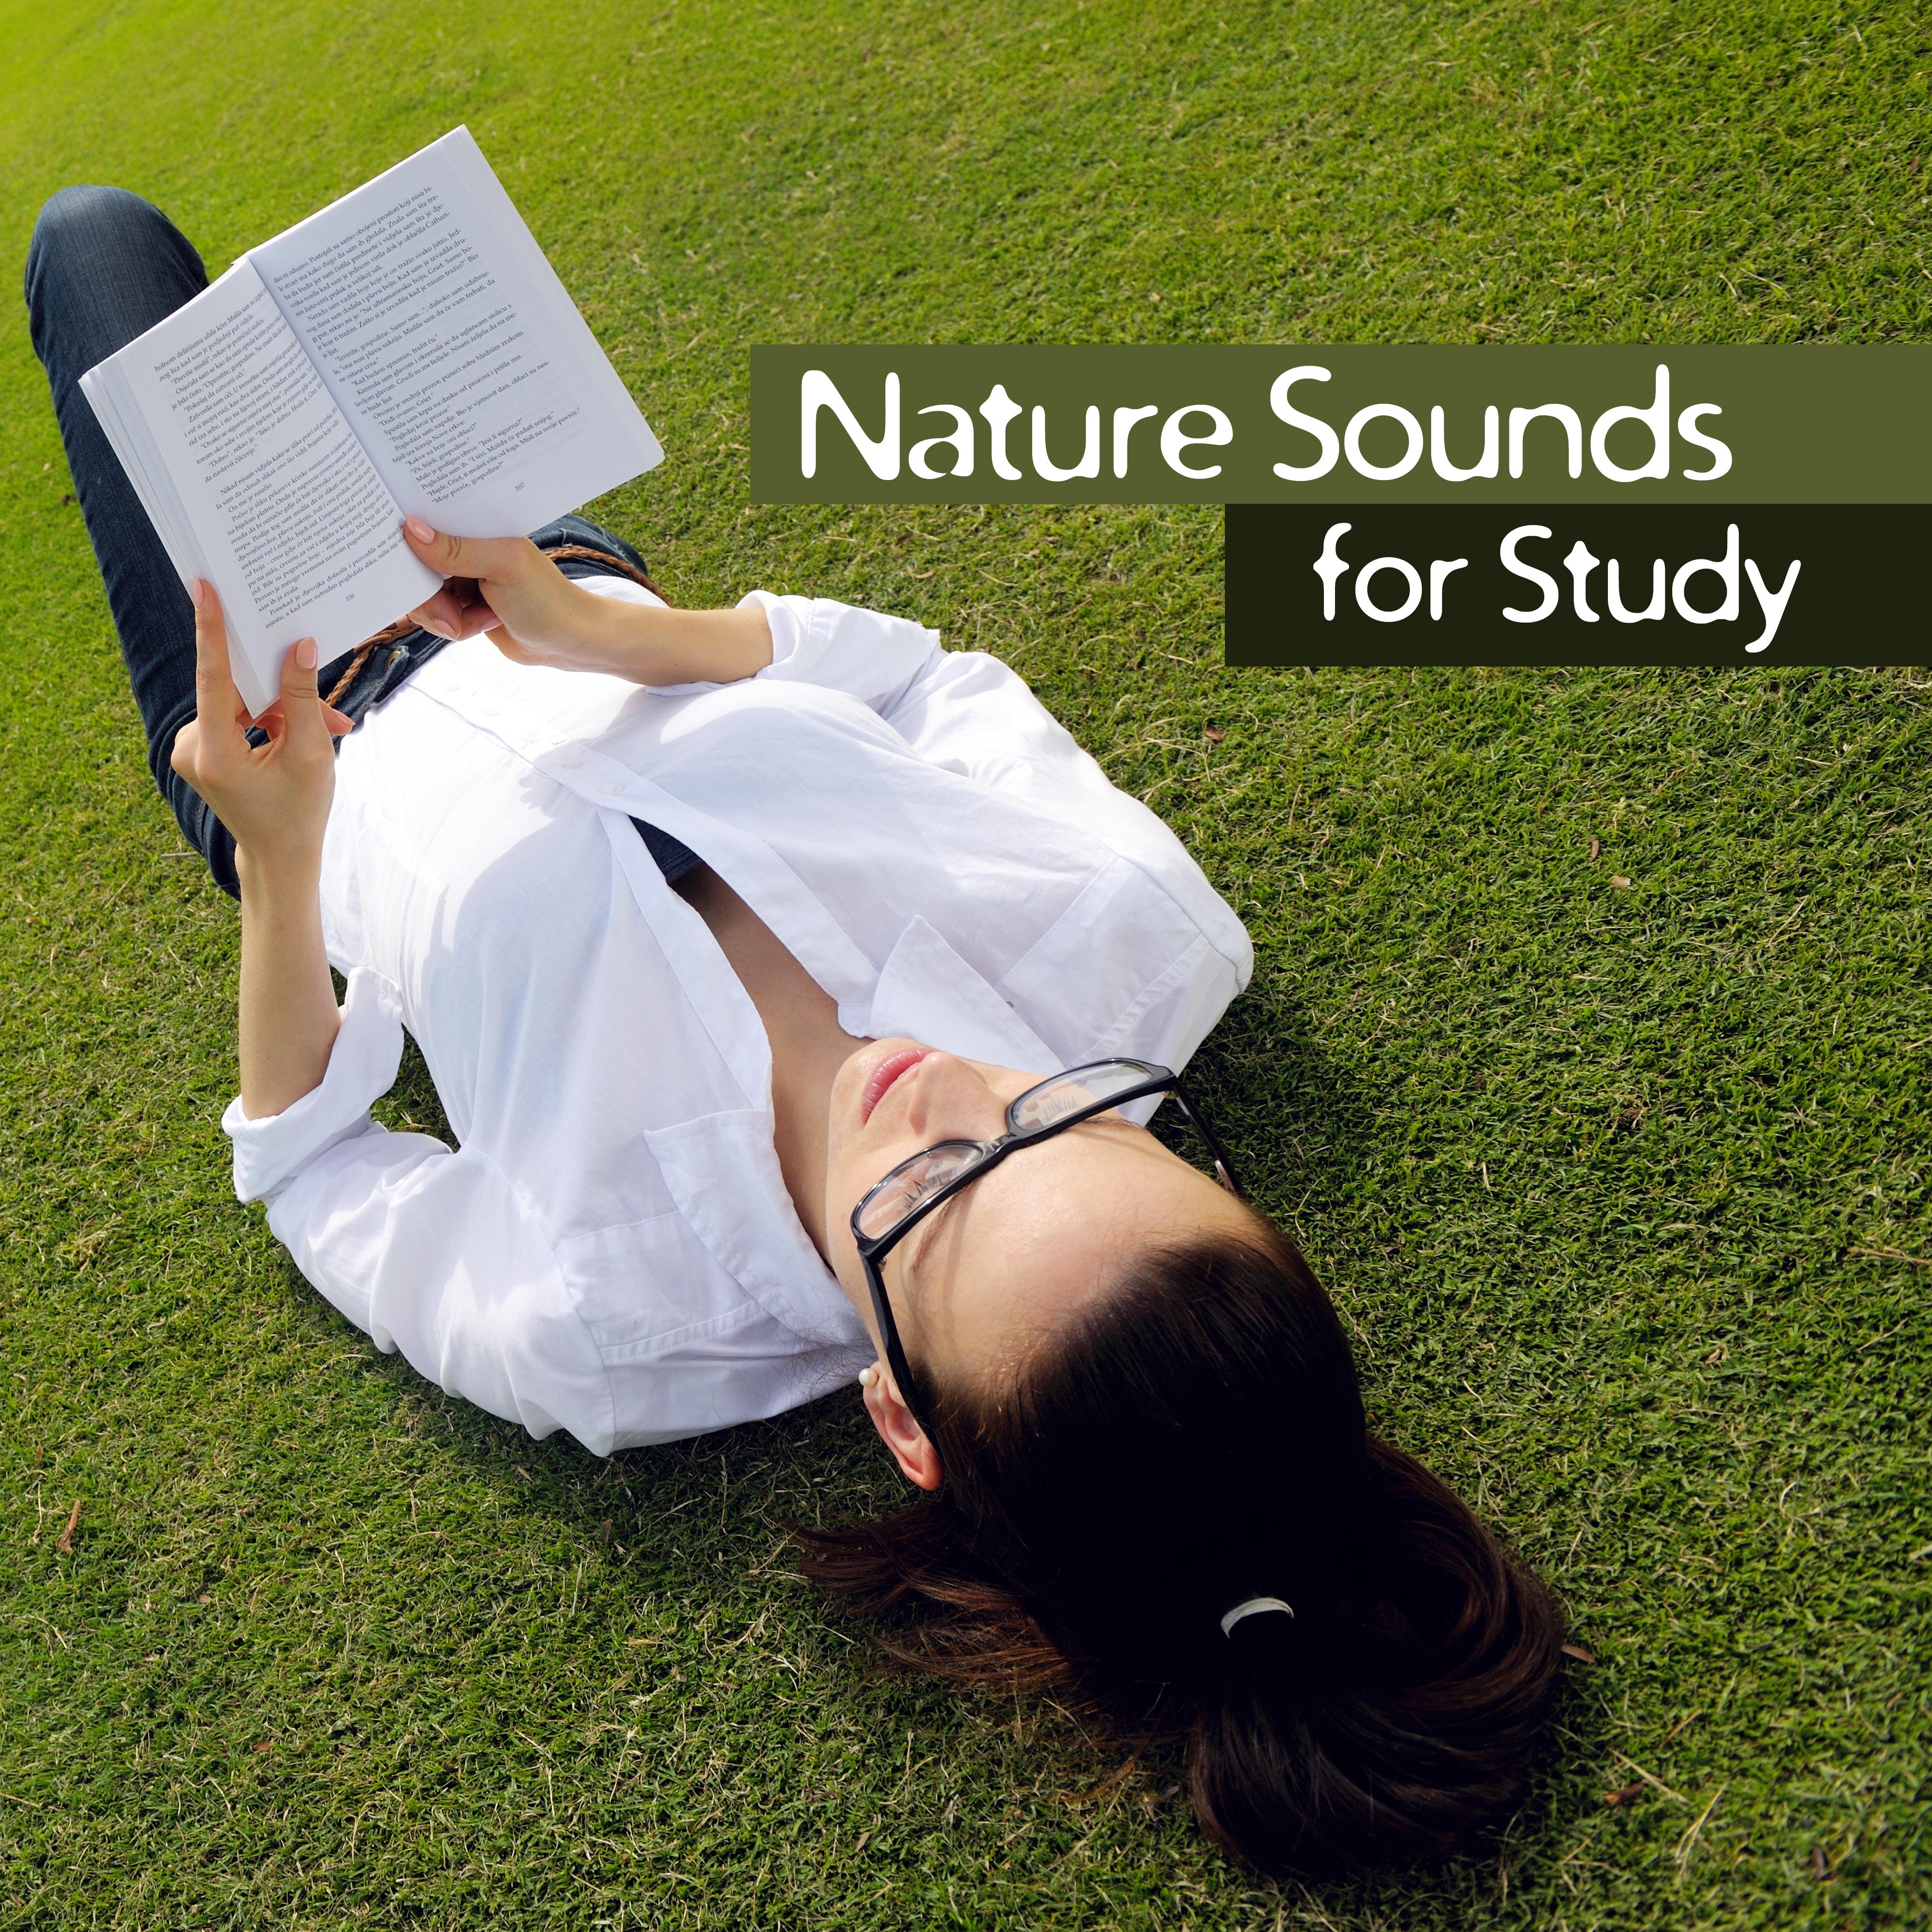 Nature Sounds for Study